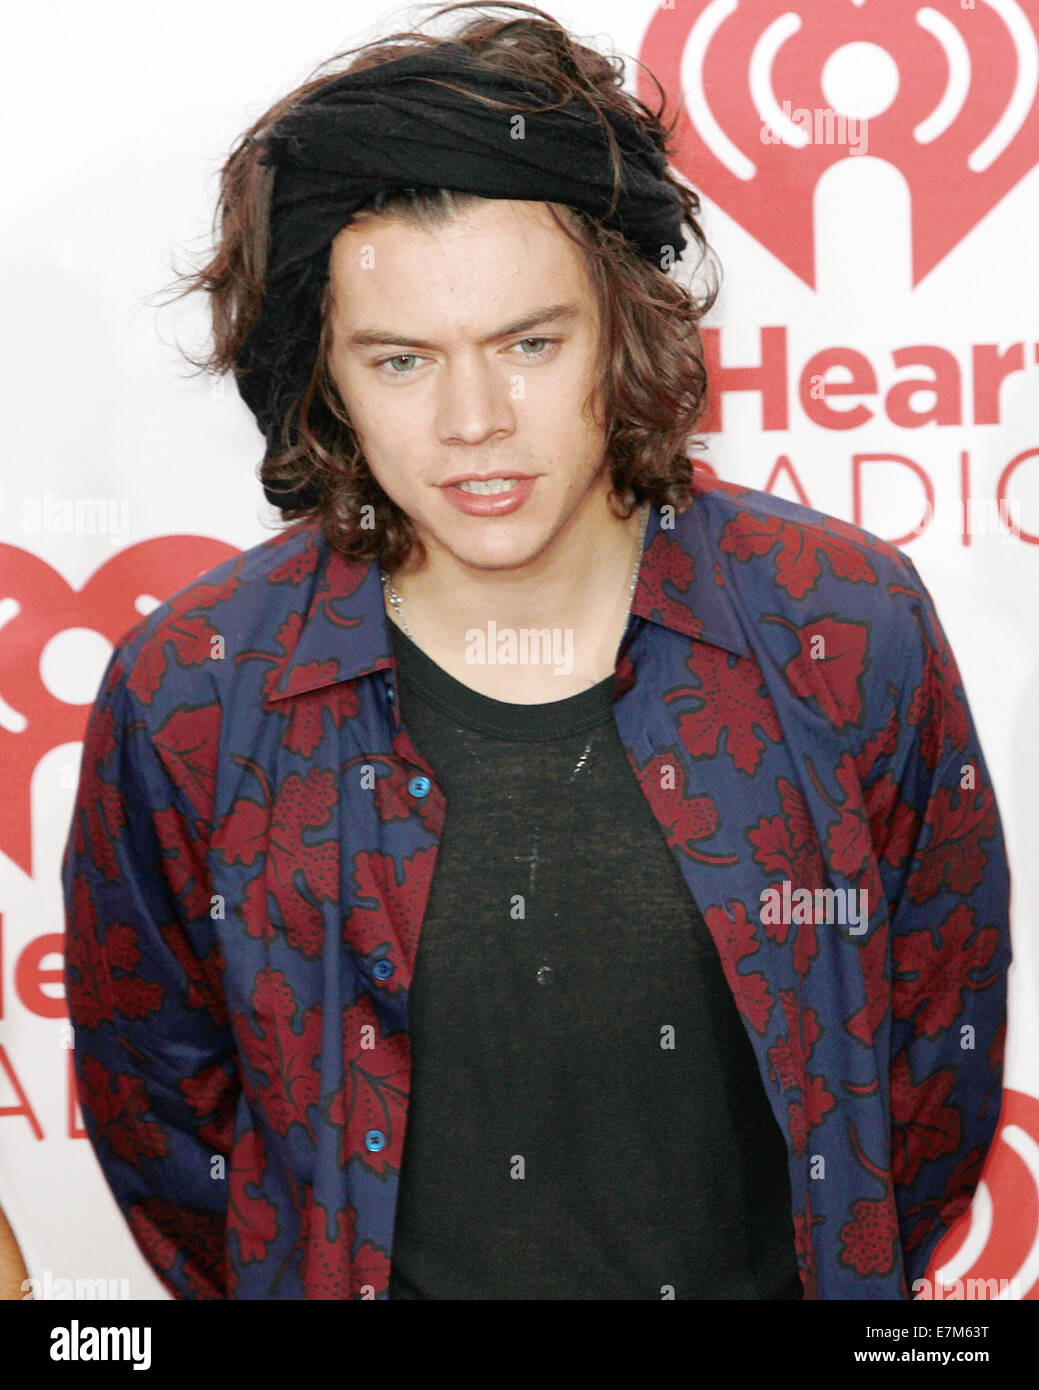 Las Vegas, Nevada, USA. 20th Sep, 2014. Harry Styles of the music group One  Direction attends Day 2 of the 2014 iHeartRadio Music Festival on September  20, 2014 at MGM Grand Aena